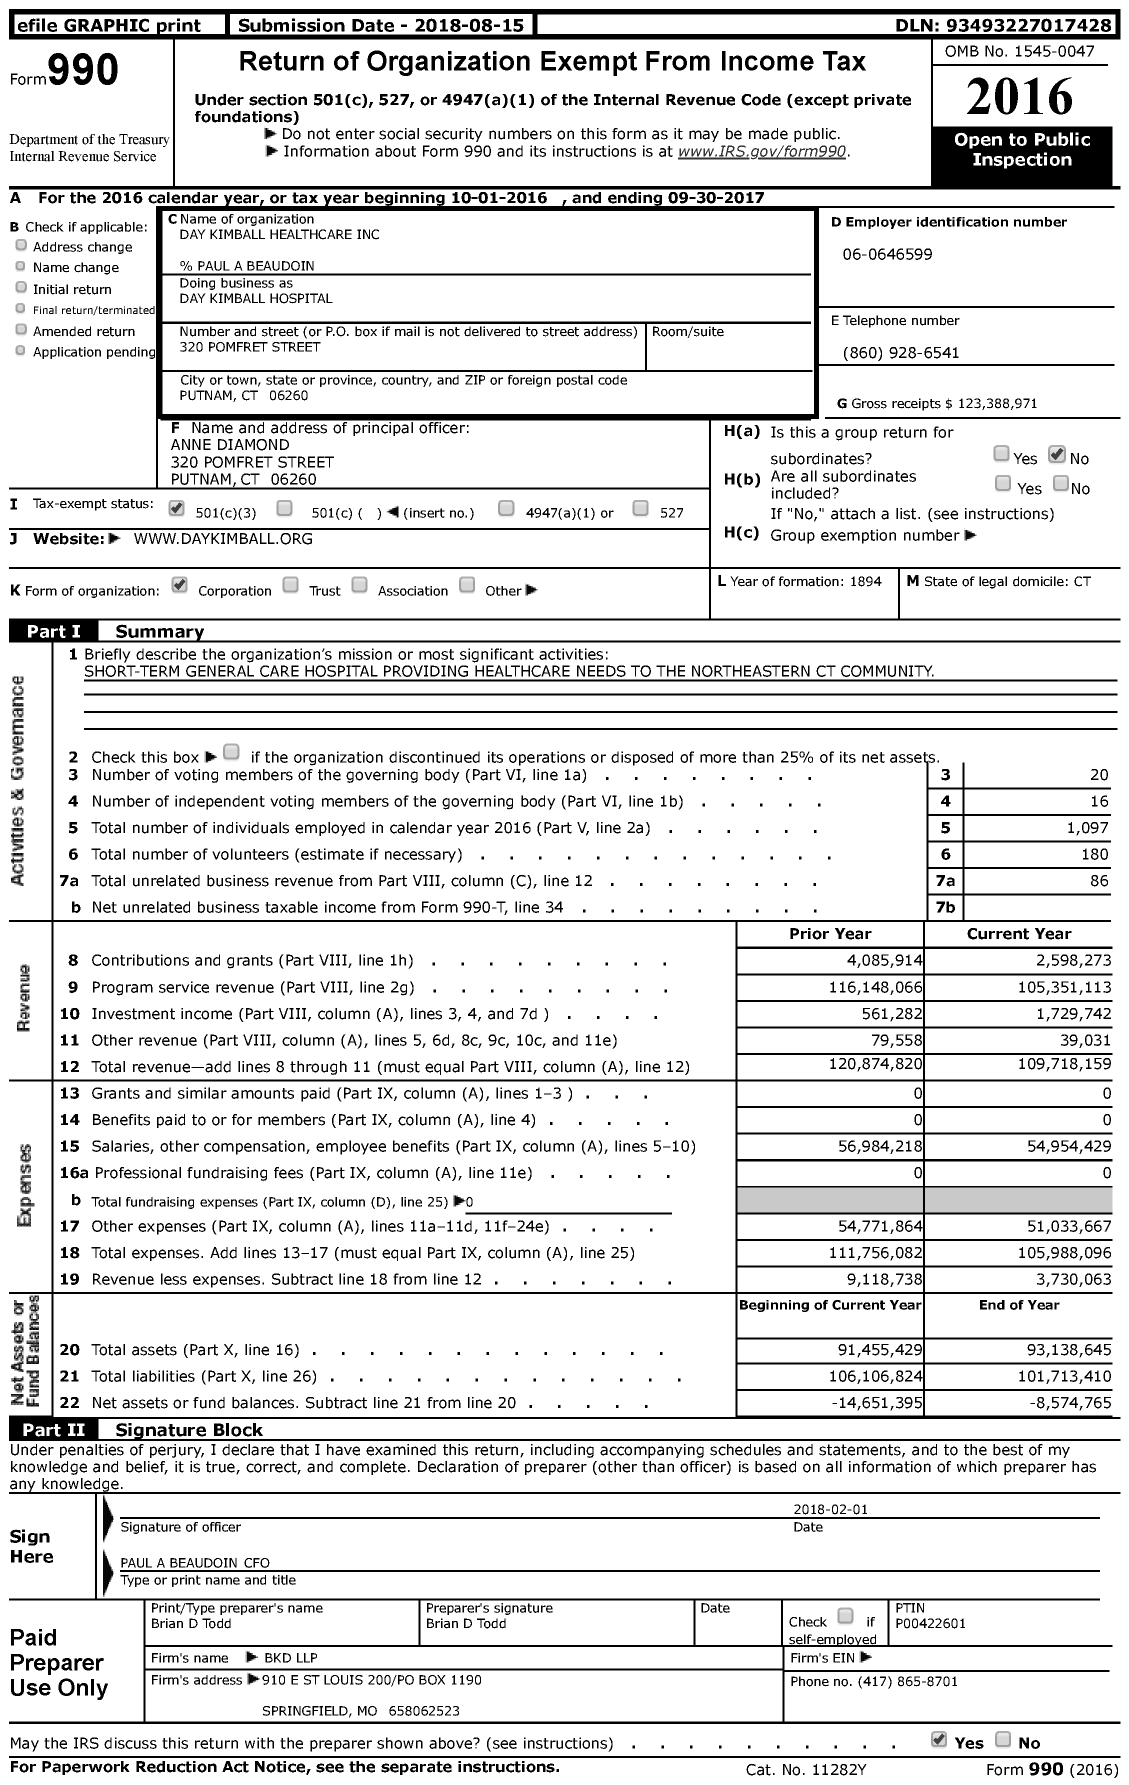 Image of first page of 2016 Form 990 for Day Kimball Healthcare (DKH)